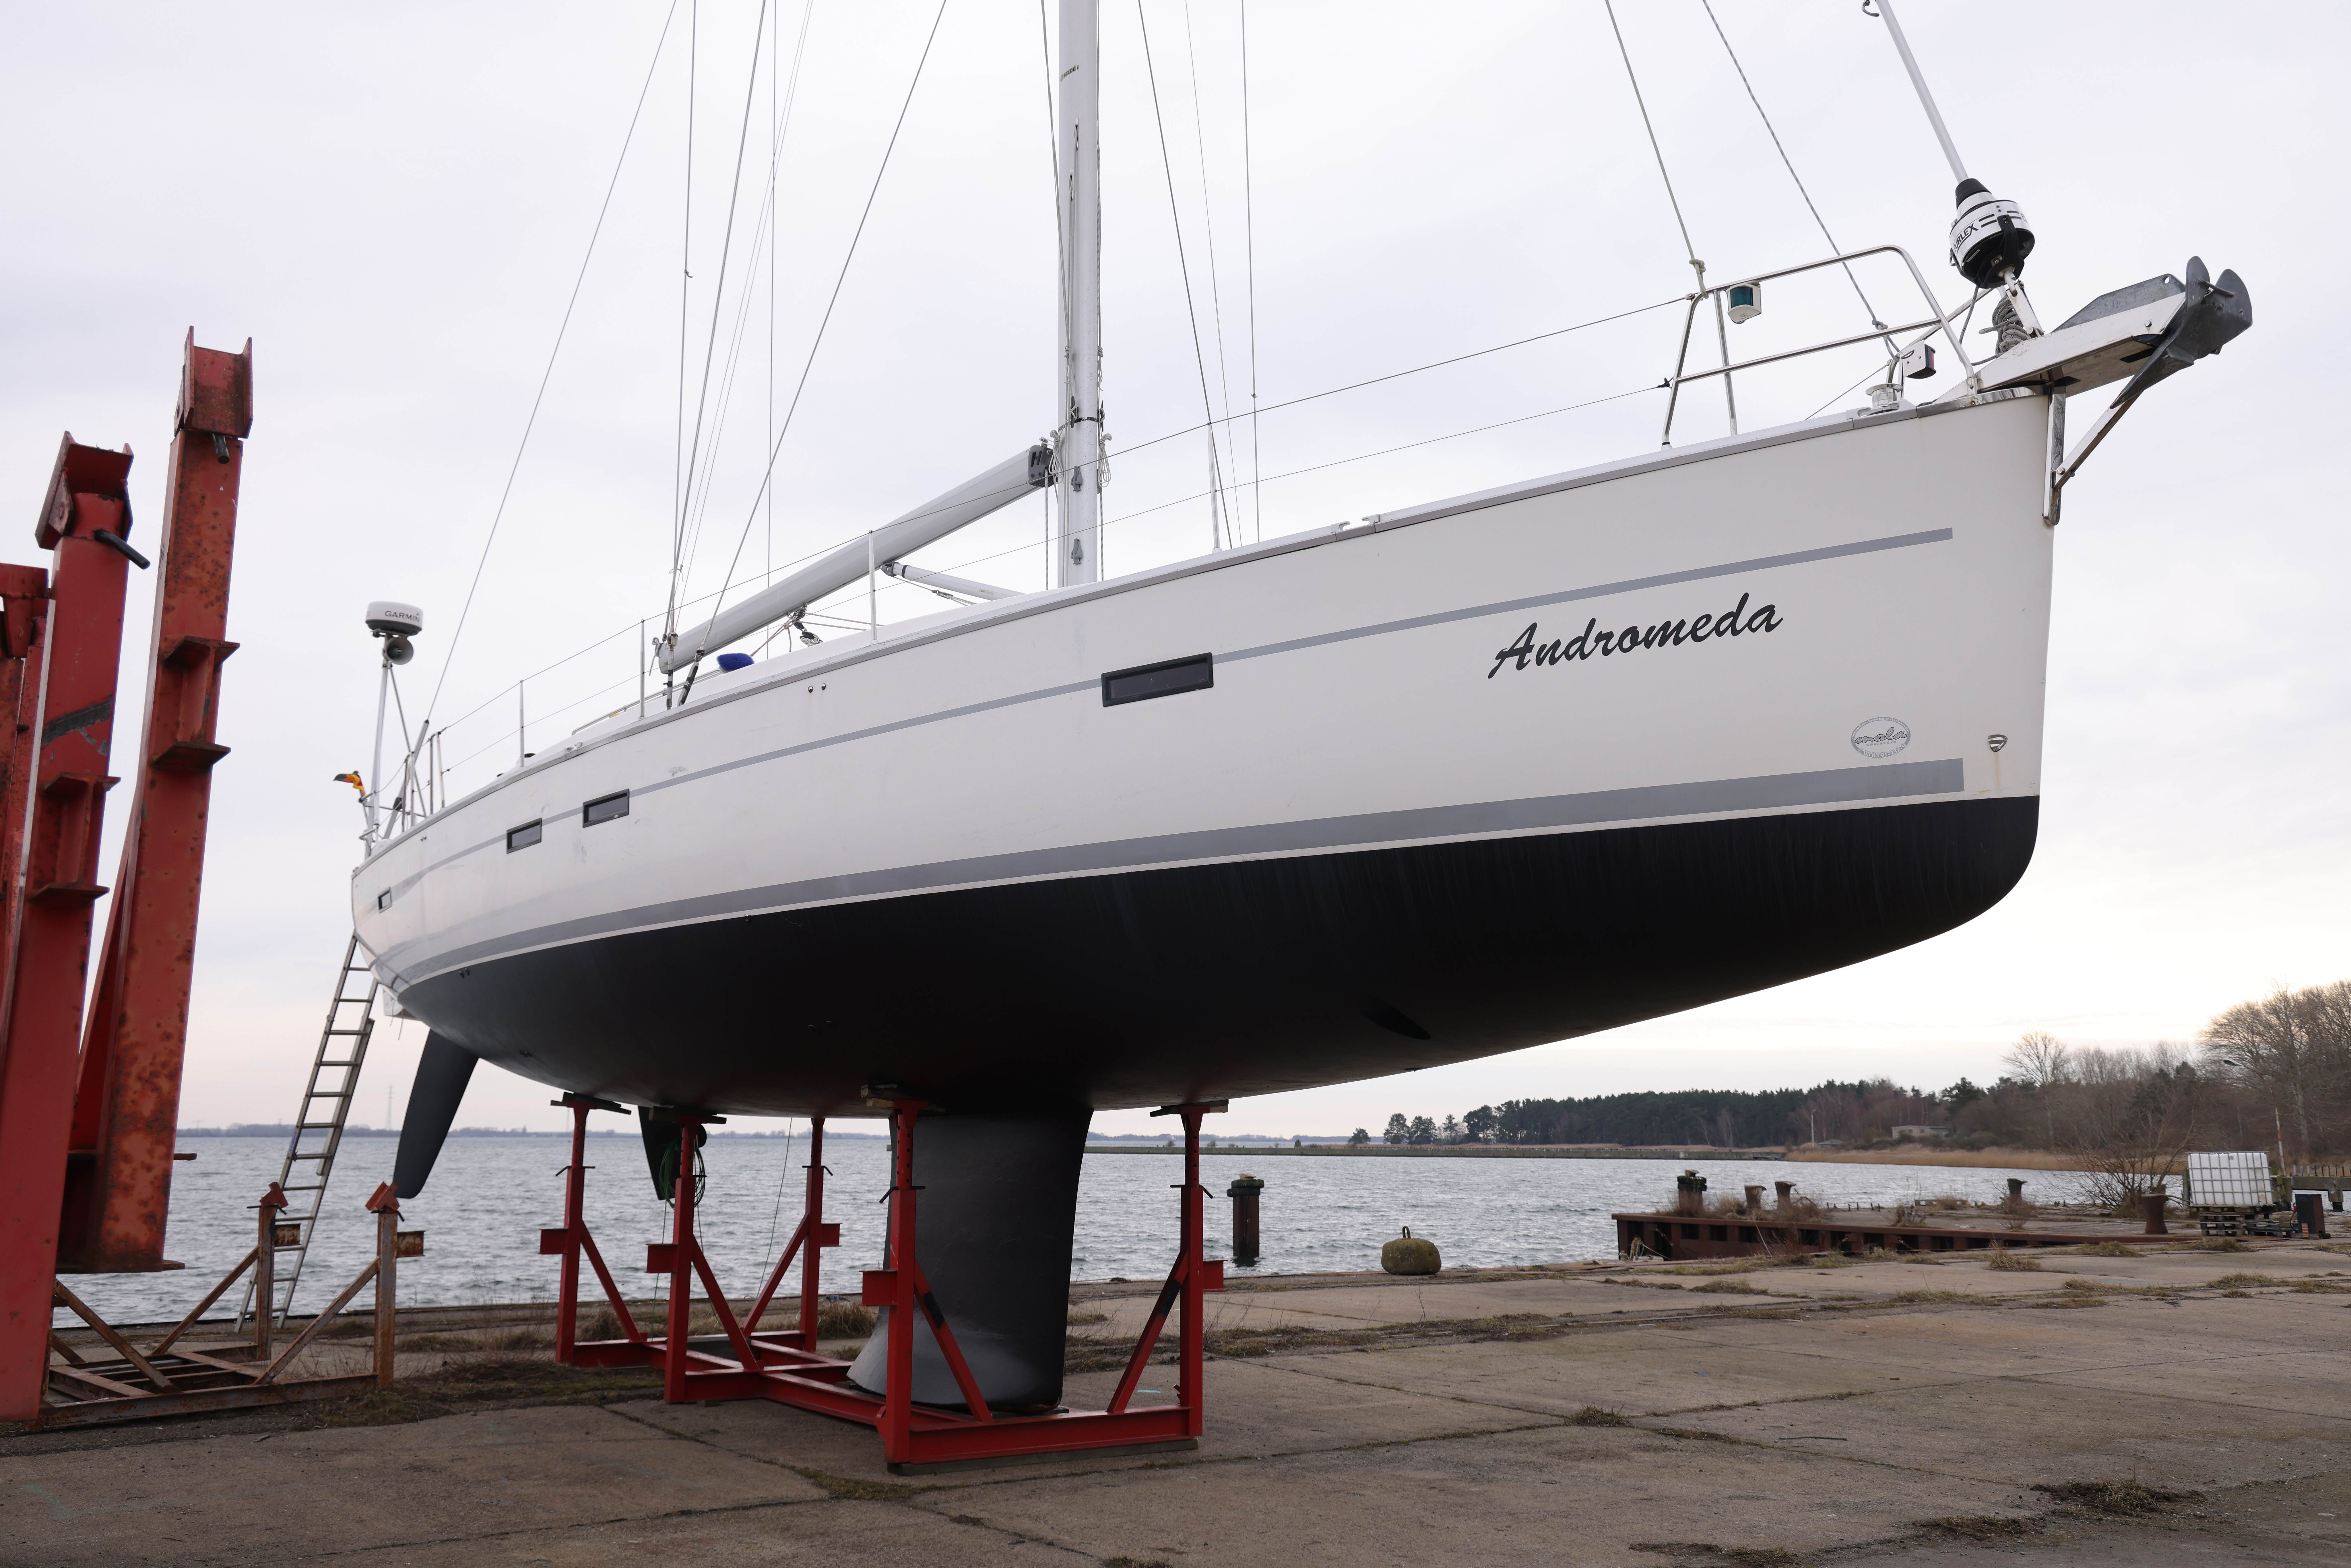 DRANSKE, GERMANY - MARCH 17: The Andromeda, a 50-foot Bavaria 50 Cruiser recreational sailing yacht, stands in dry dock on the headland of Bug on Ruegen Island on March 17, 2023 near Dranske, Germany. According to media reports, German investigators searched the boat recently and suspect a six-person crew used it to sail to the Baltic Sea and plant explosives that detonated on the Nord Stream pipeline in September of 2022, causing extensive damage. Investigators reportedly found traces of explosives on the table inside the yacht. While initial findings point to a possible Ukrainian connection to the sabotage operation, many questions remain open. 